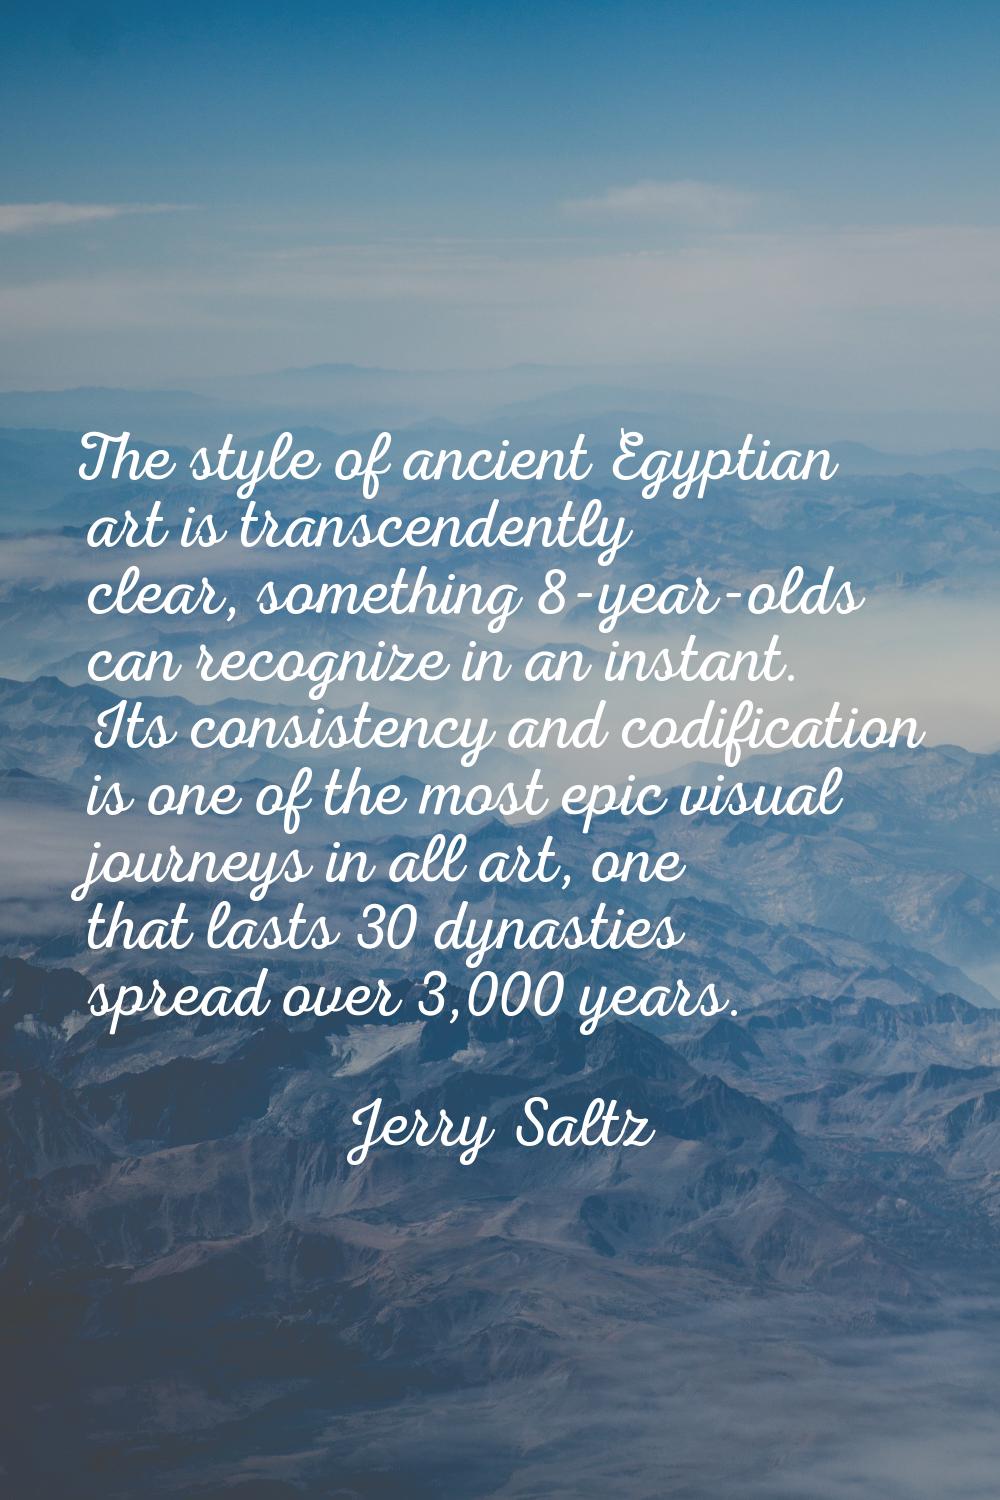 The style of ancient Egyptian art is transcendently clear, something 8-year-olds can recognize in a